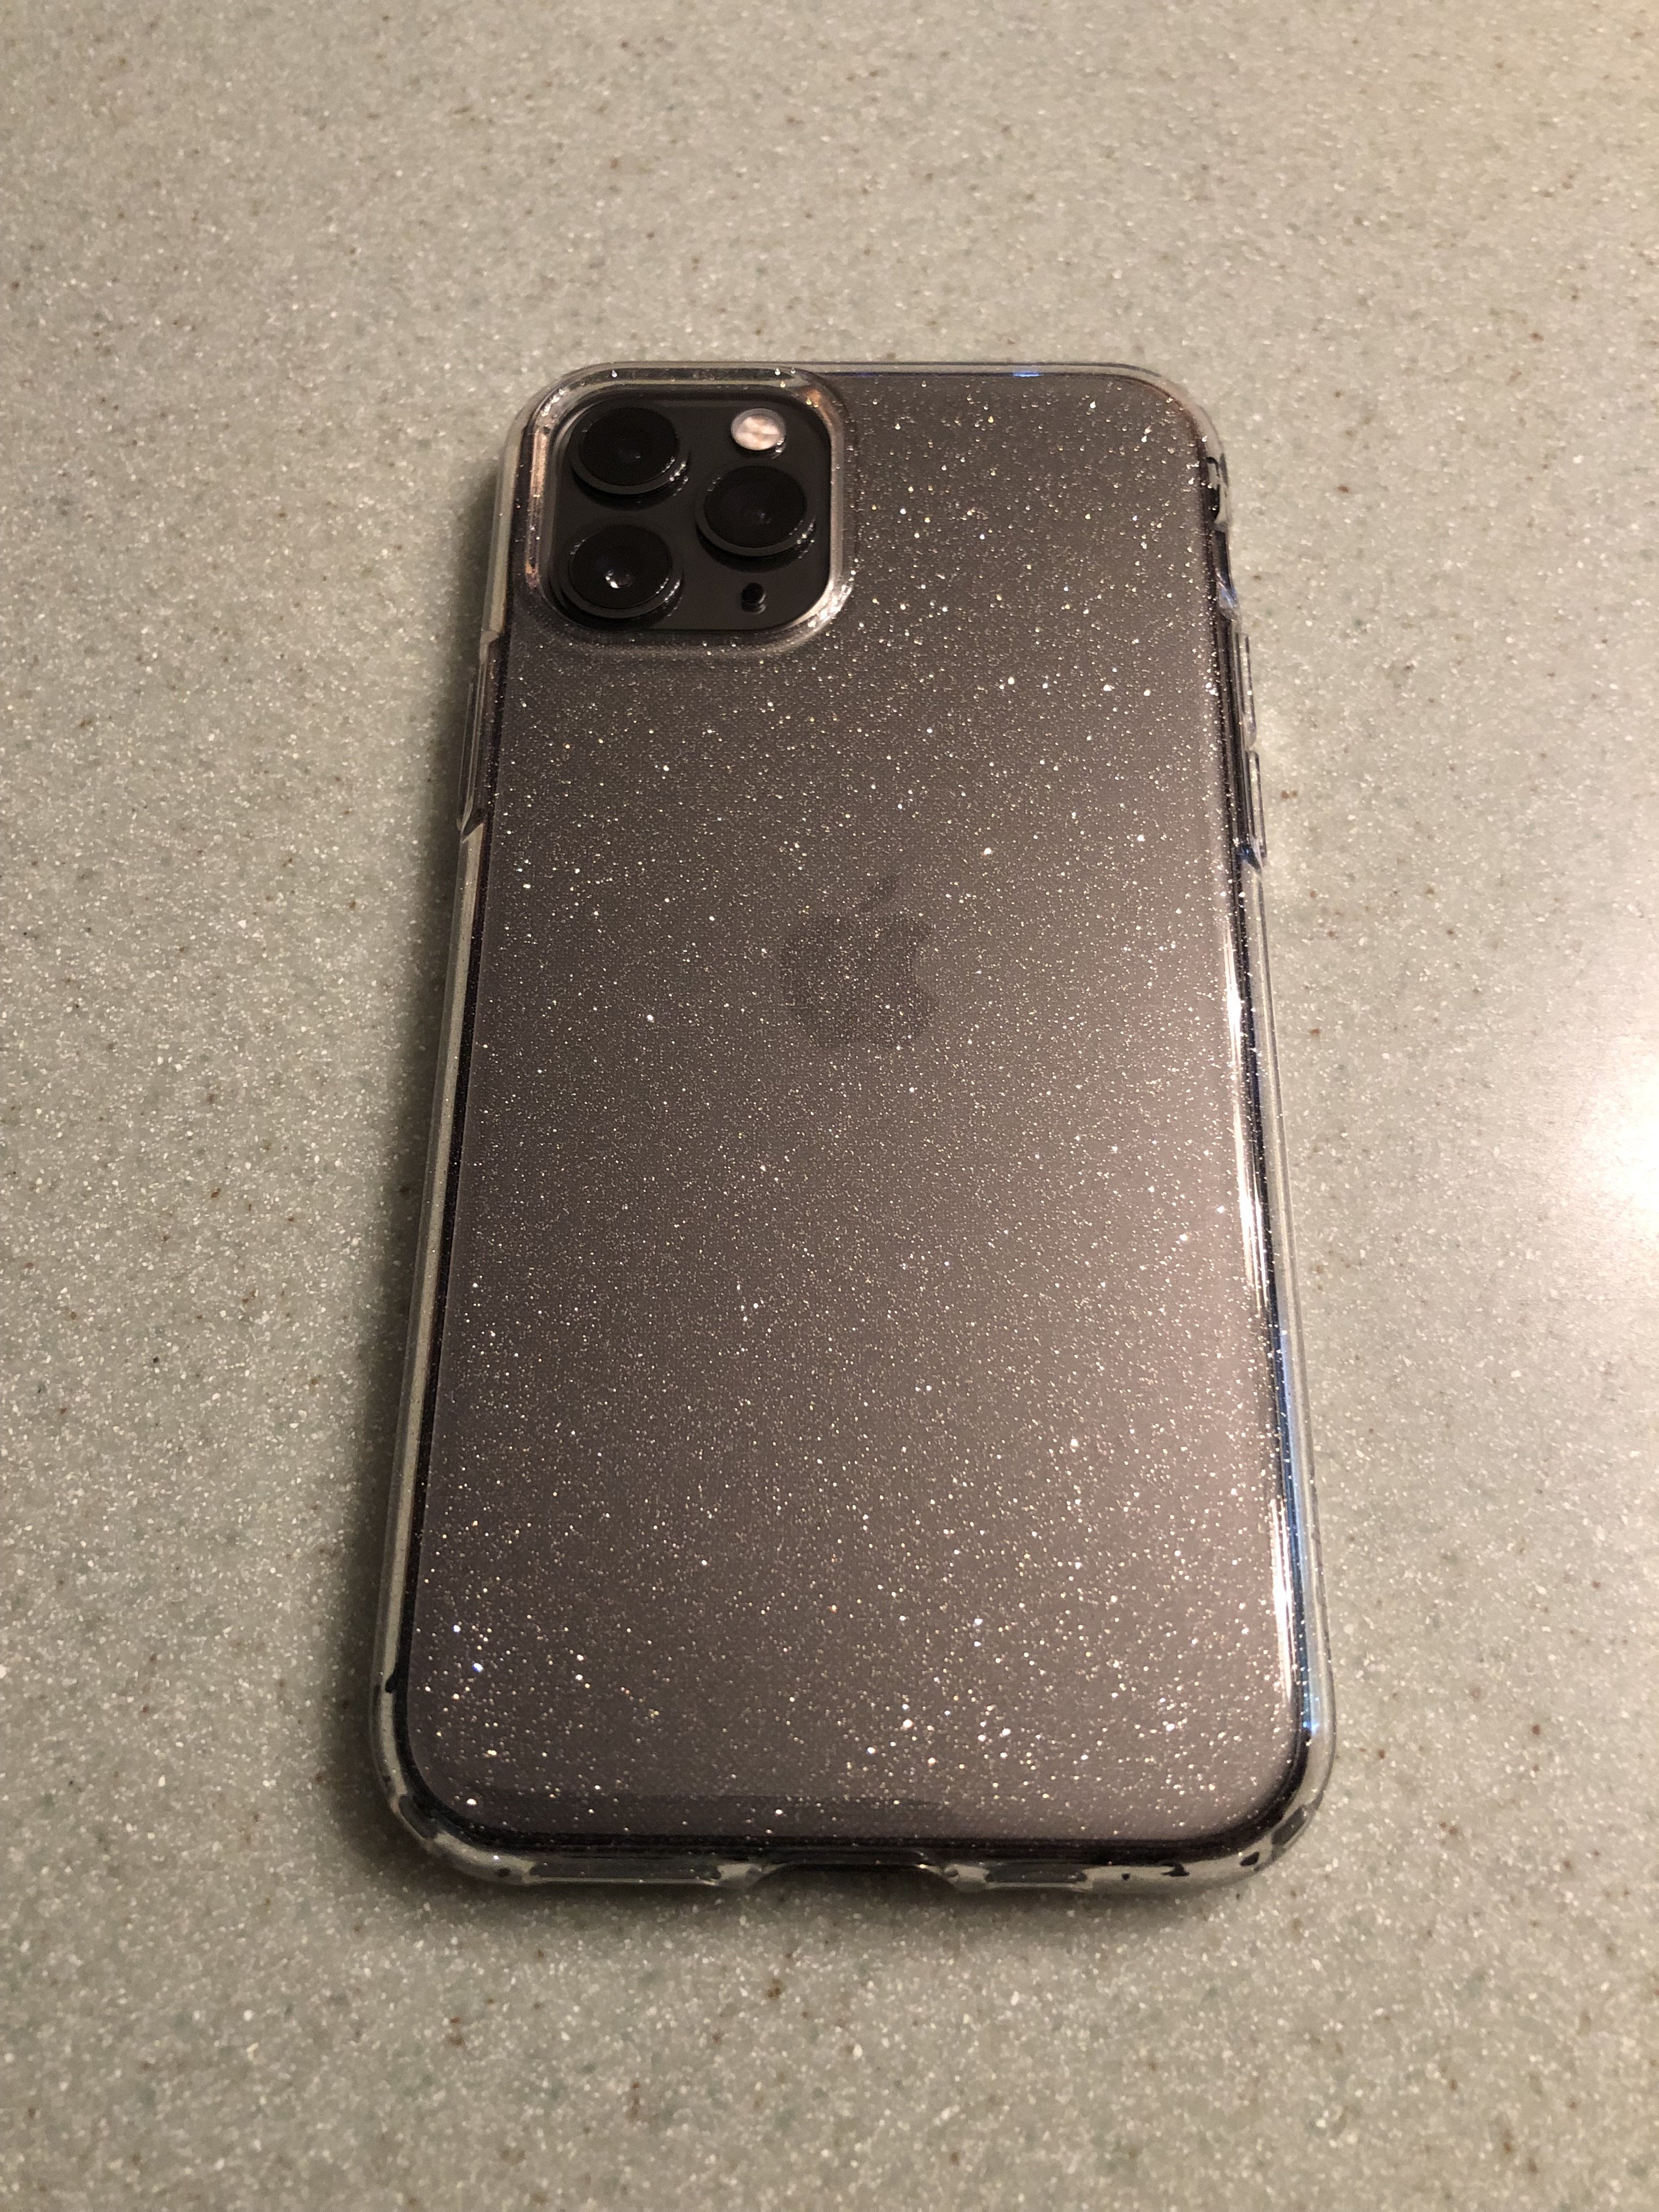 Which Case Did You Get For Your New Iphone 11 Pro Max Merged Macrumors Forums